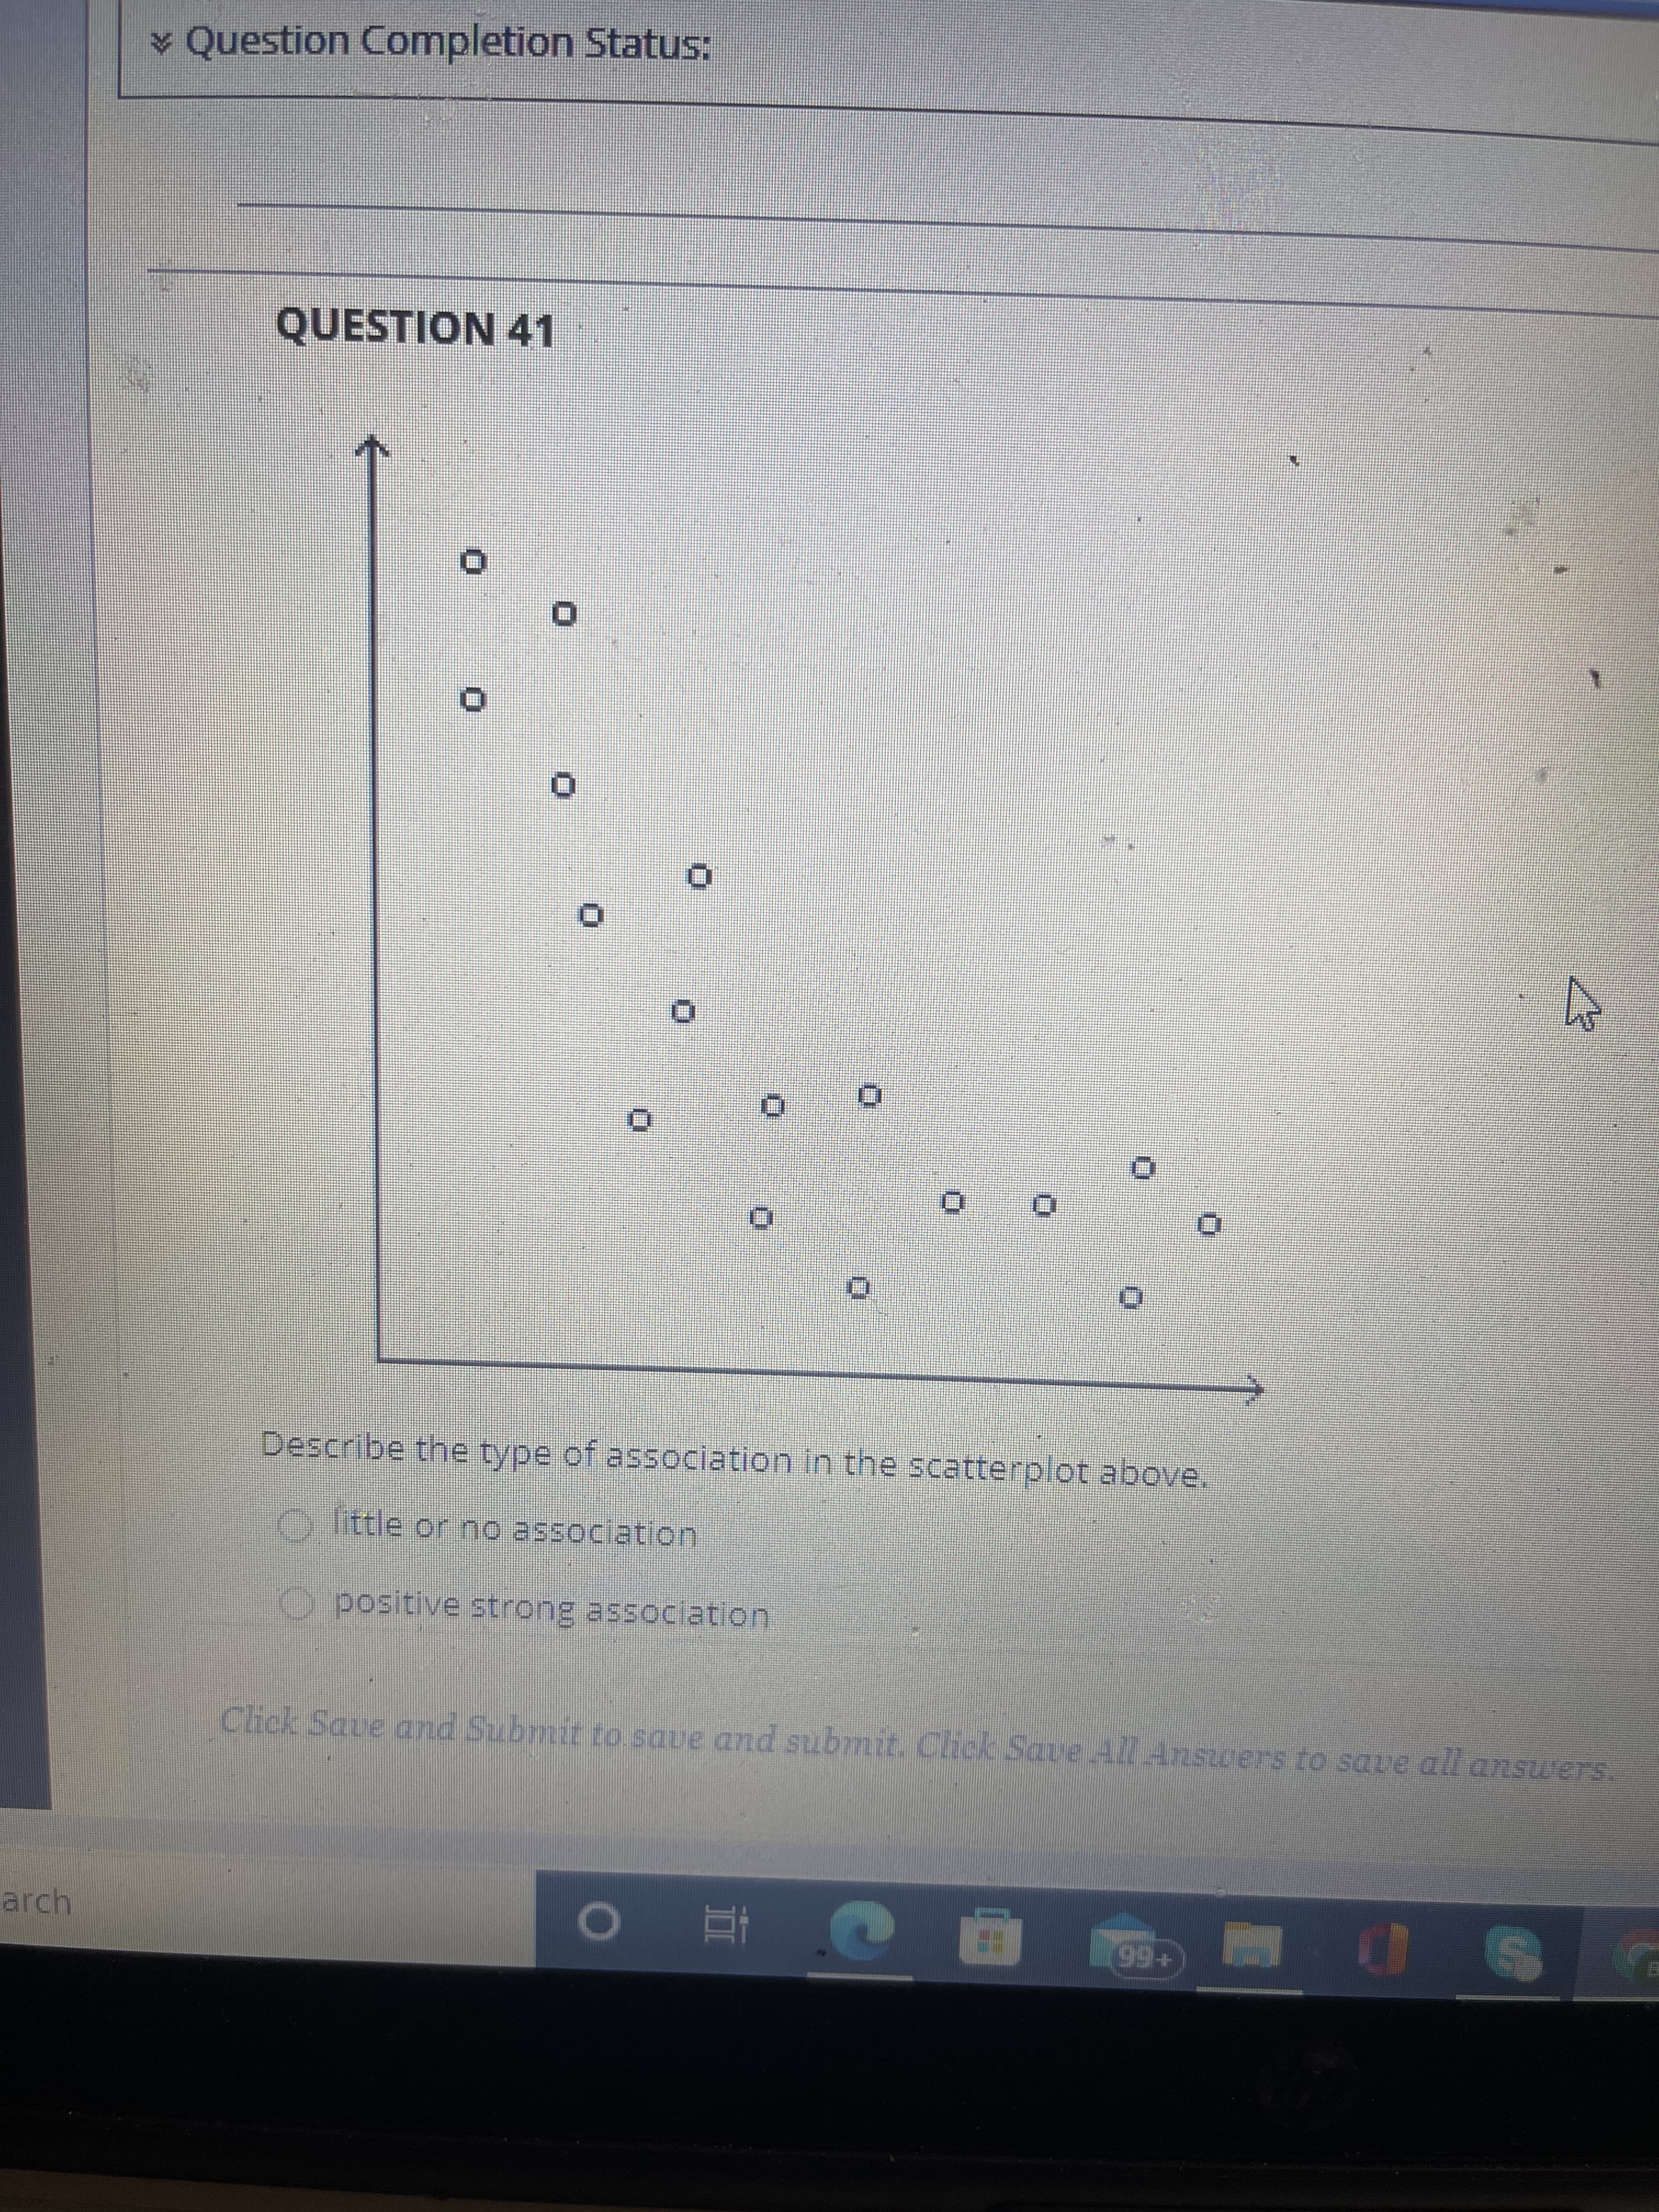 ¥ Question Completion Status:
QUESTION 41
Describe the type of association in the scatterplot above.
y little or no association
O positive strong association
Click Saue and Submit to save and submit. Click Save All Answers to save all answers
arch
+66
|回 五o
